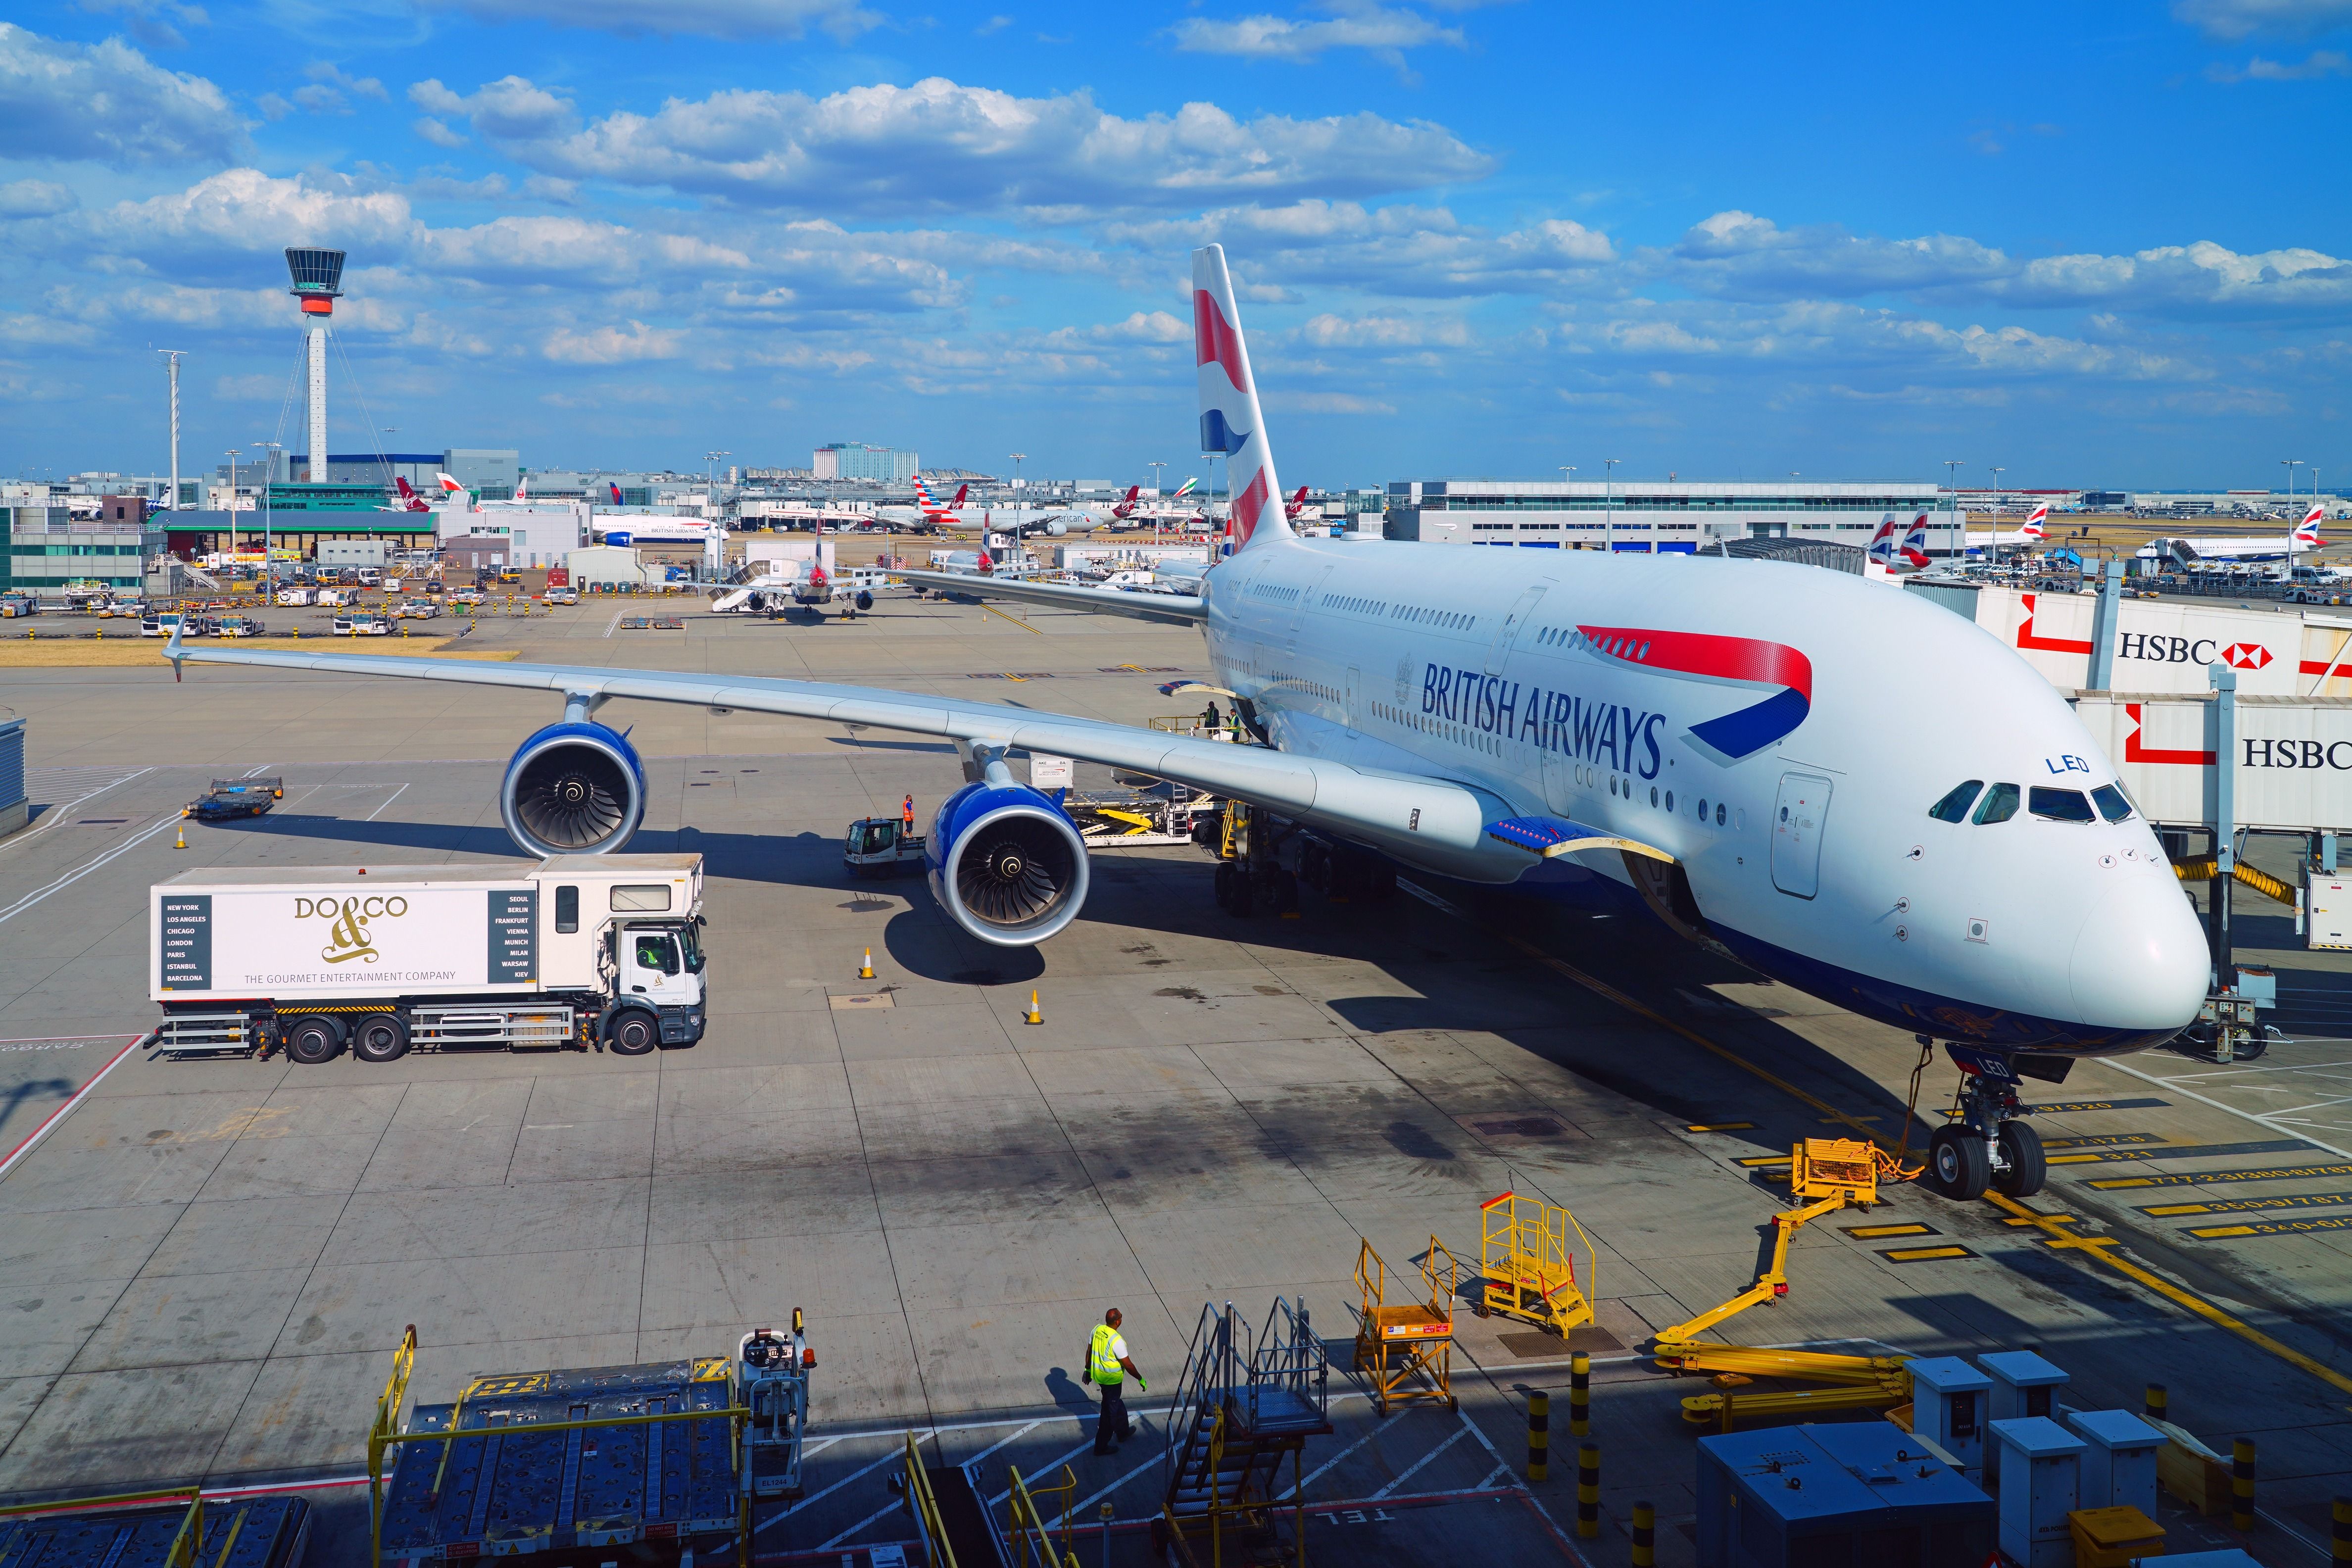 A British Airways Airbus A380 parked at a gate at London Heathrow Airport.